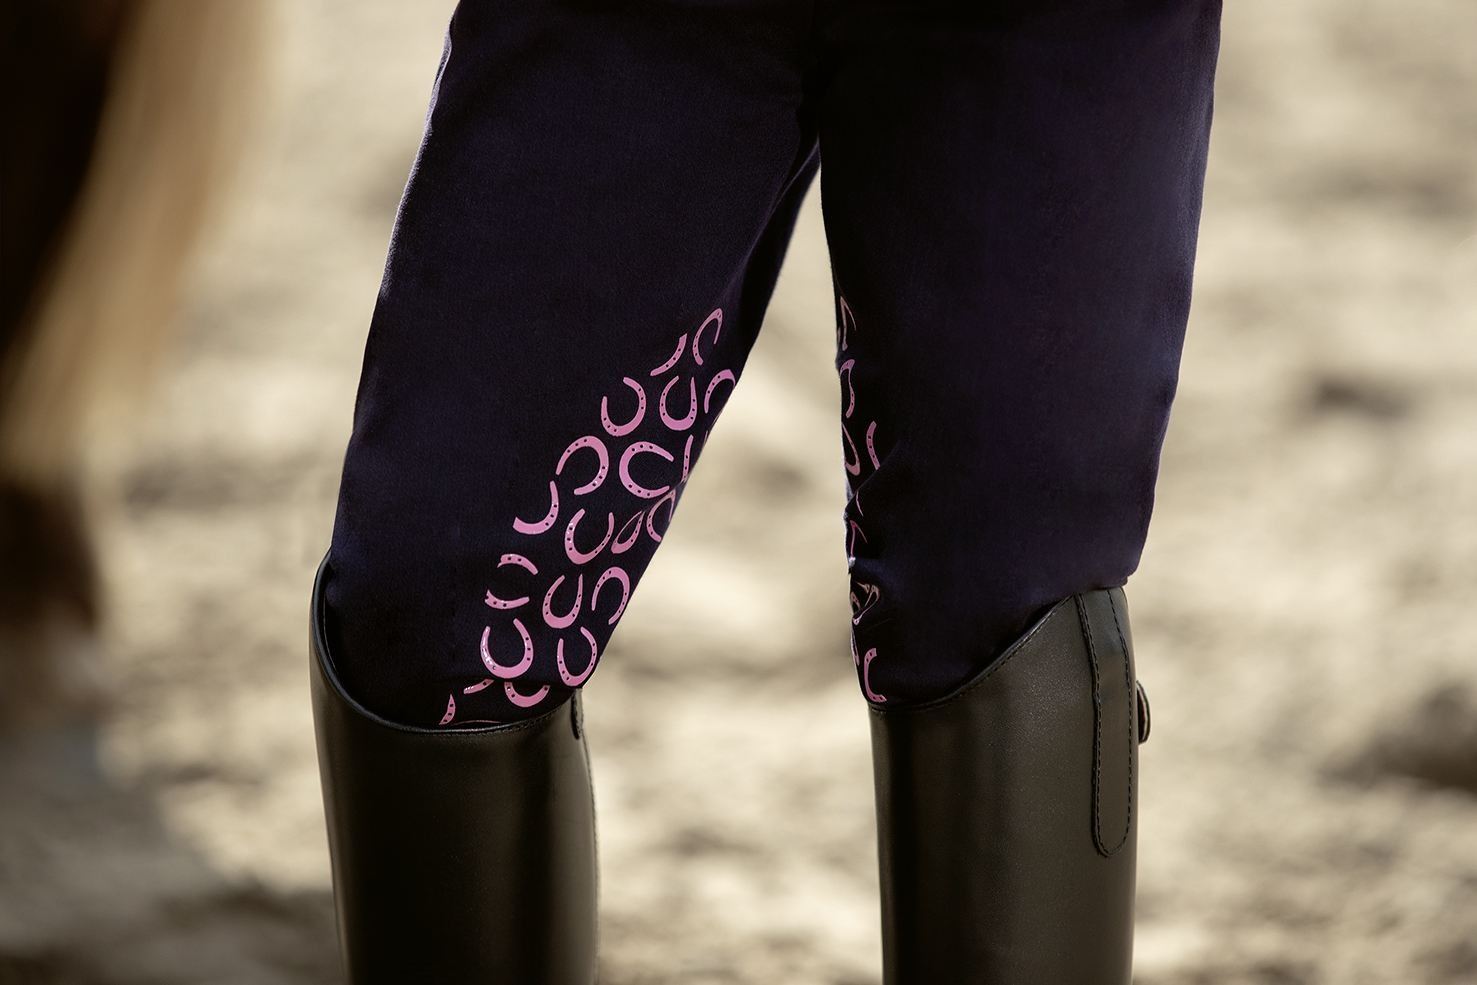 HKM Riding Breeches Pink Pony - Just Horse Riders